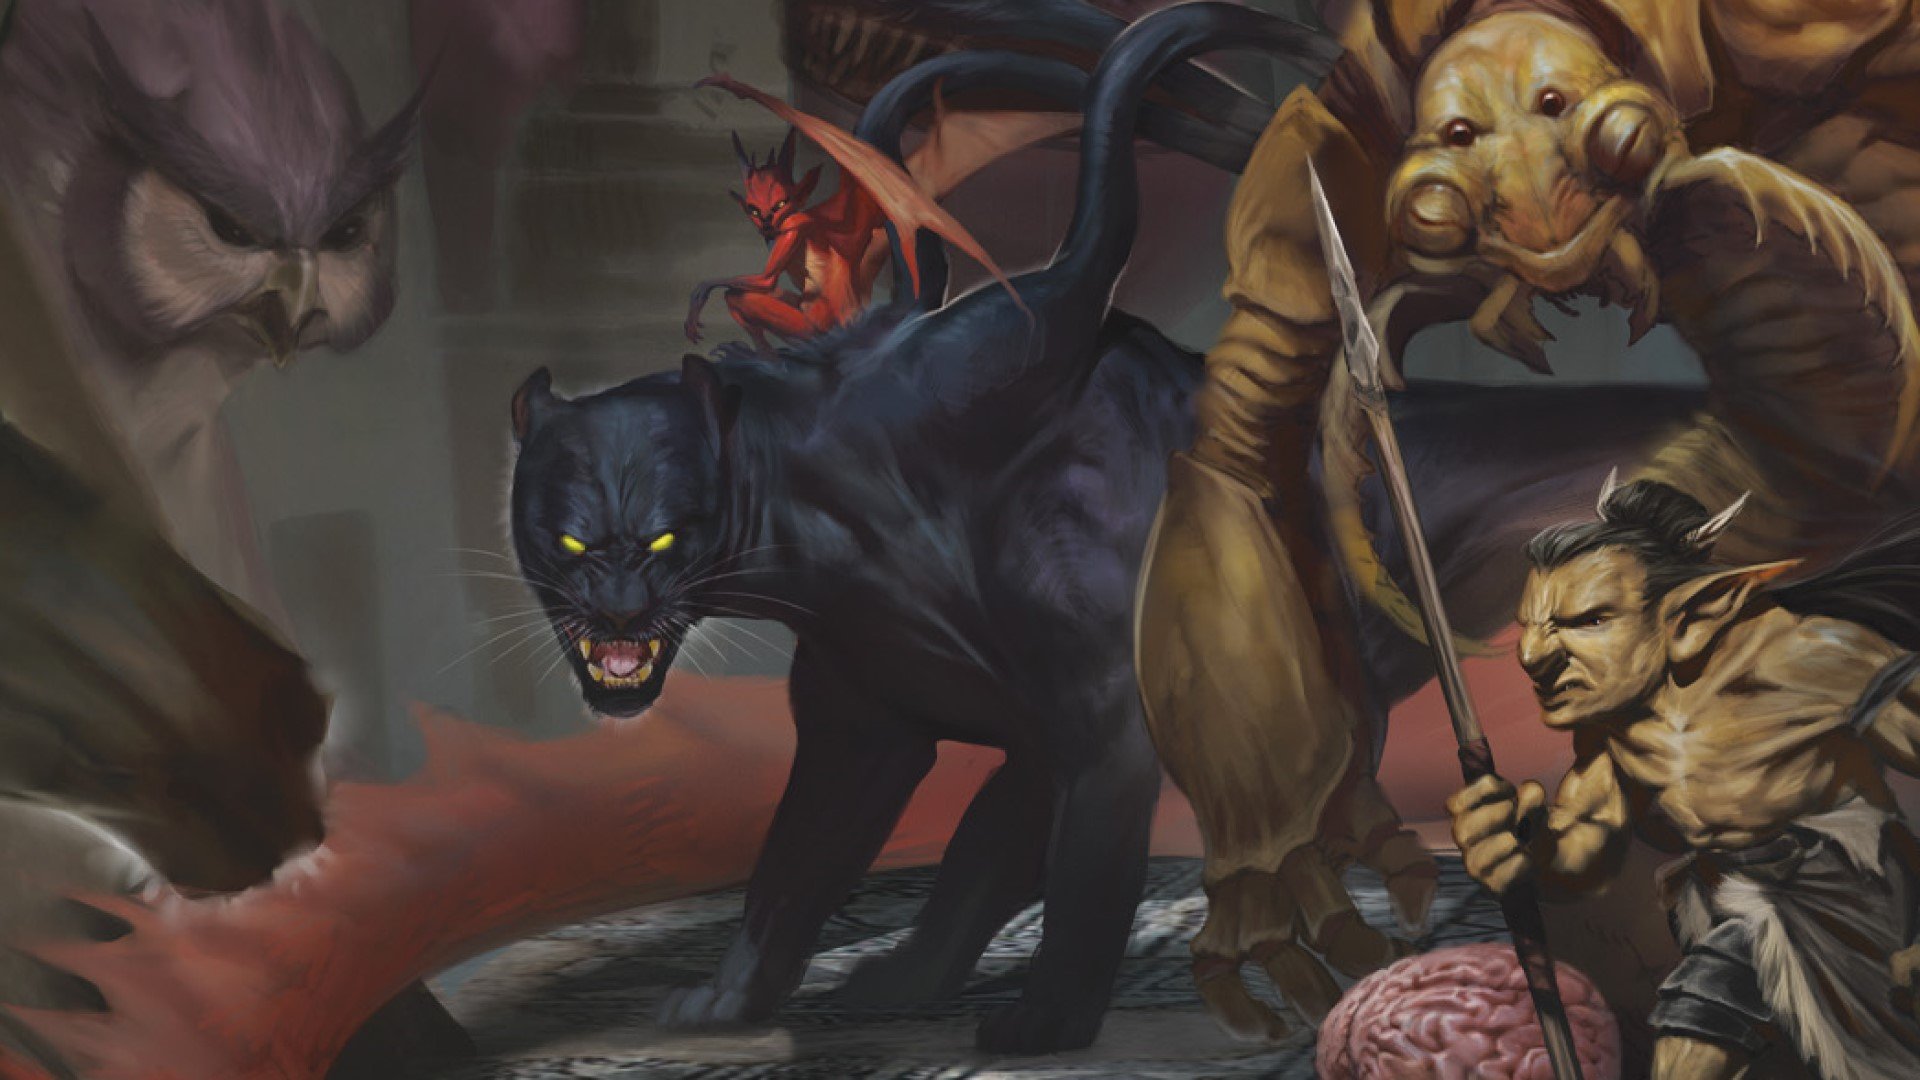 DnD Displacer Beast 5e surrounded by other monsters (art by Wizards of the Coast)